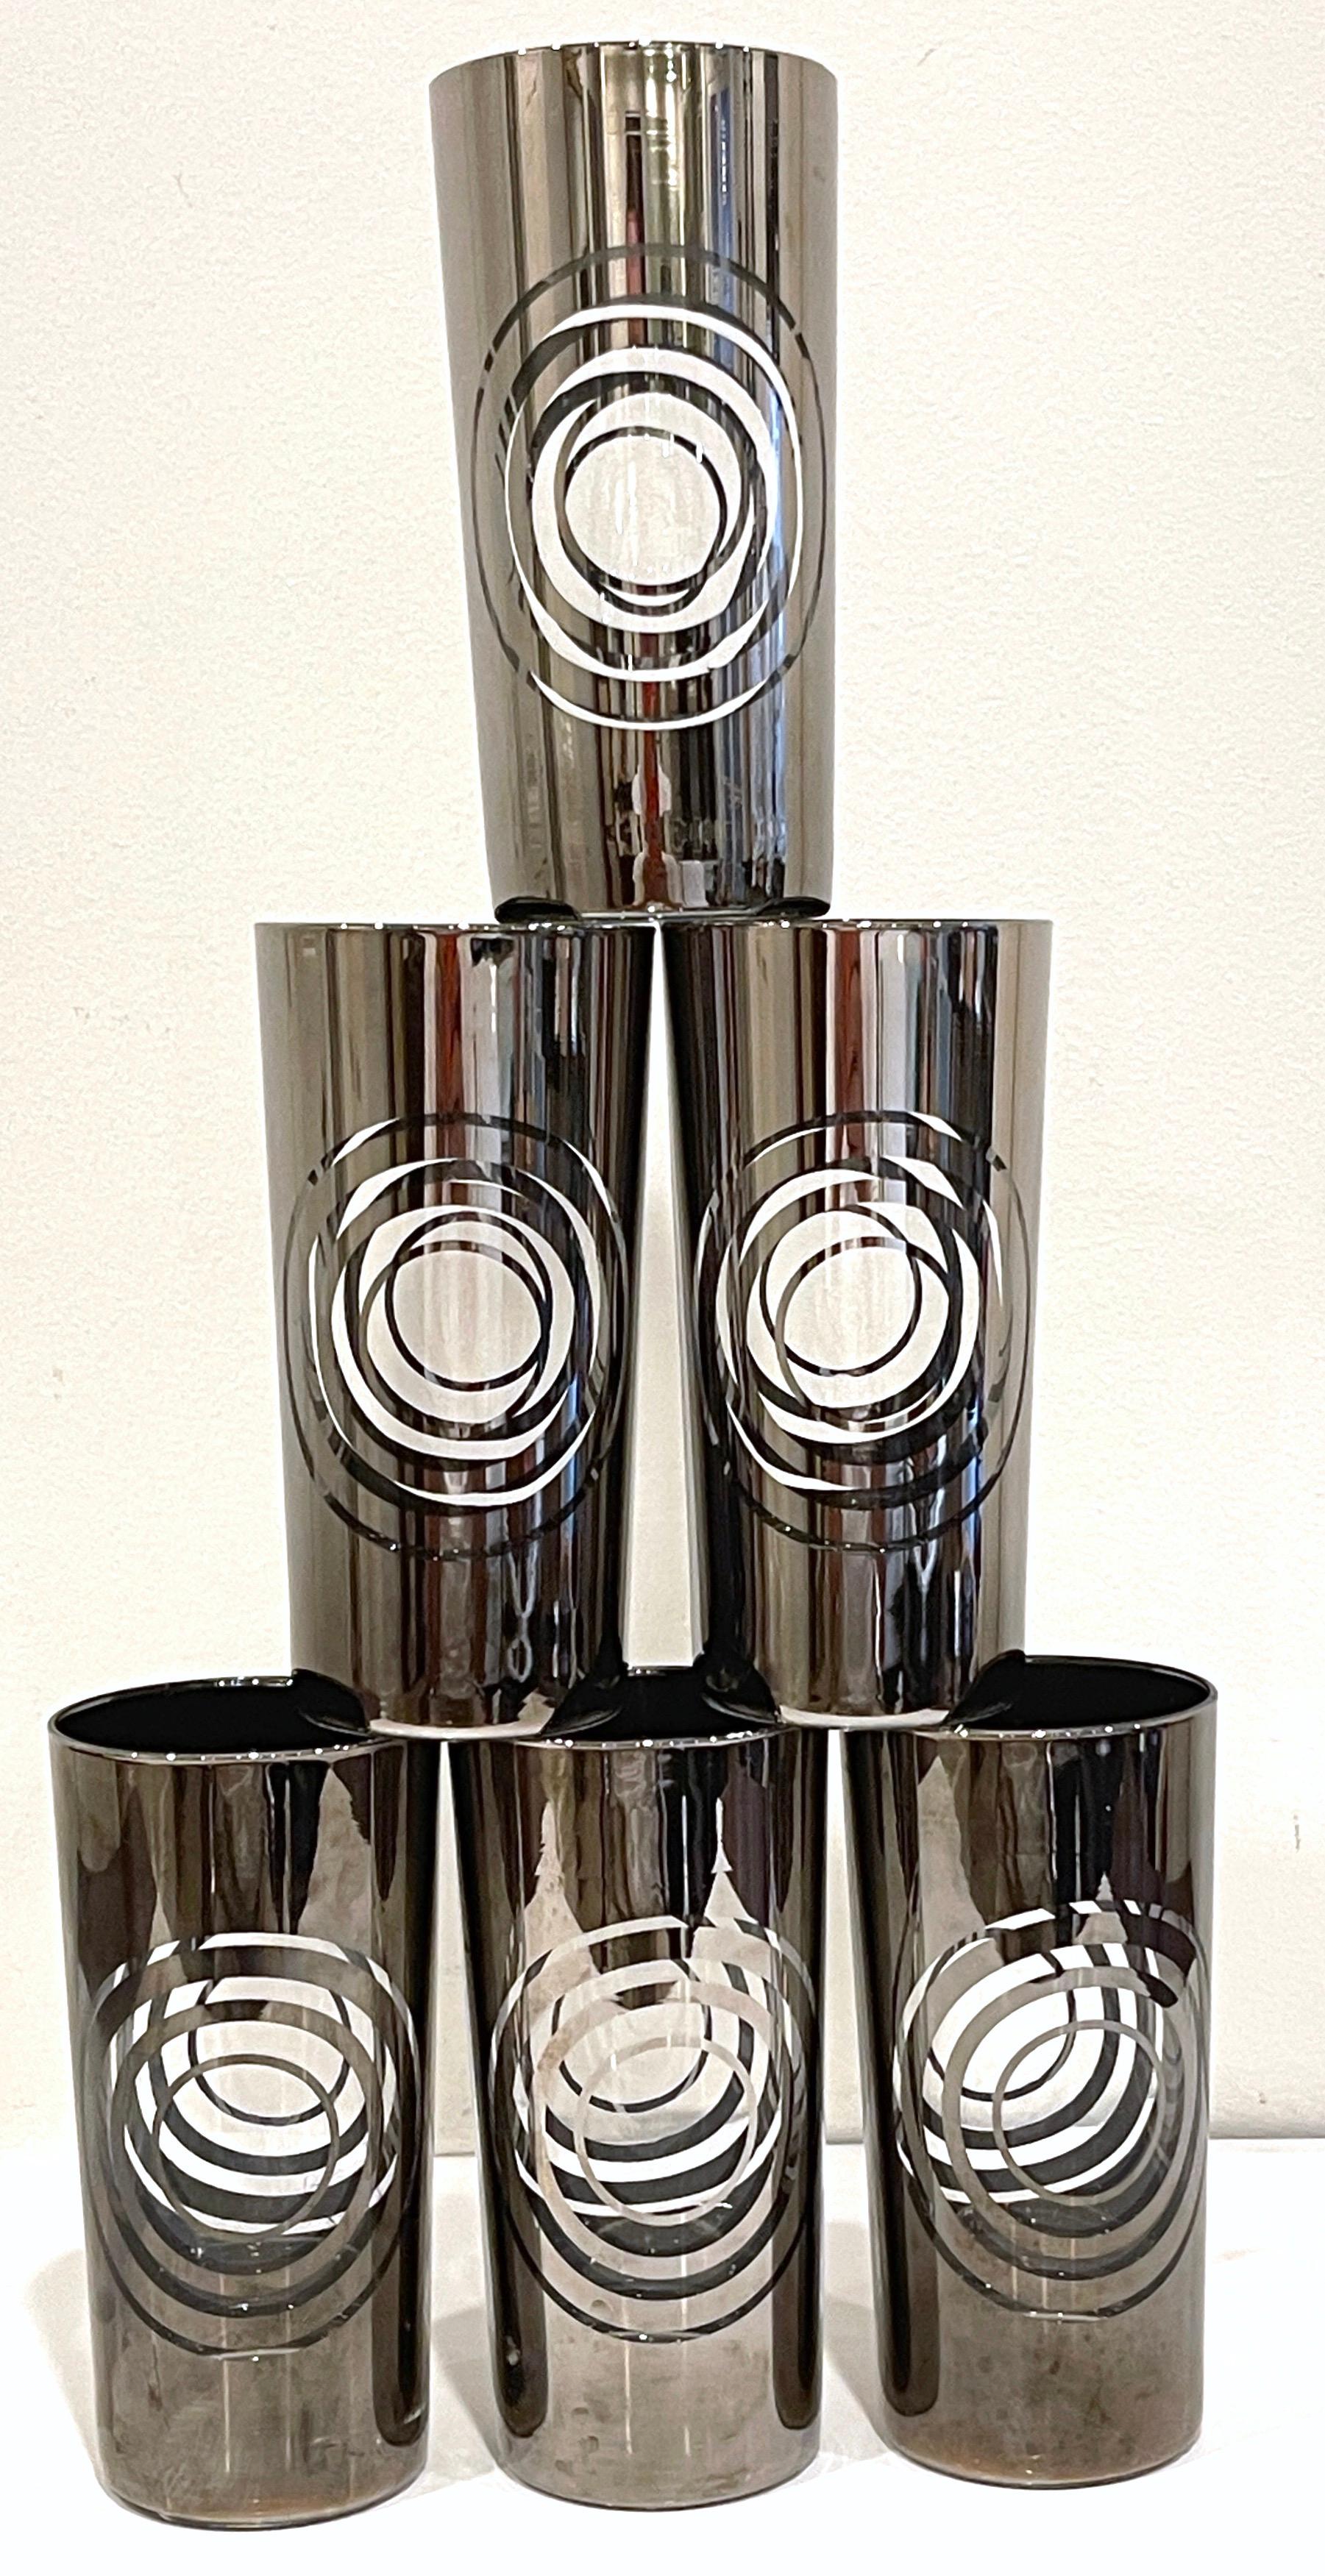 Set of Six 1970s Silvered MOD Highball Glasses 
USA, 1970s

This set of six silvered MOD highball glasses from the 1970s is a fantastic representation of unique and reflective Mid Century barware. These glasses have a distinctive quality akin to